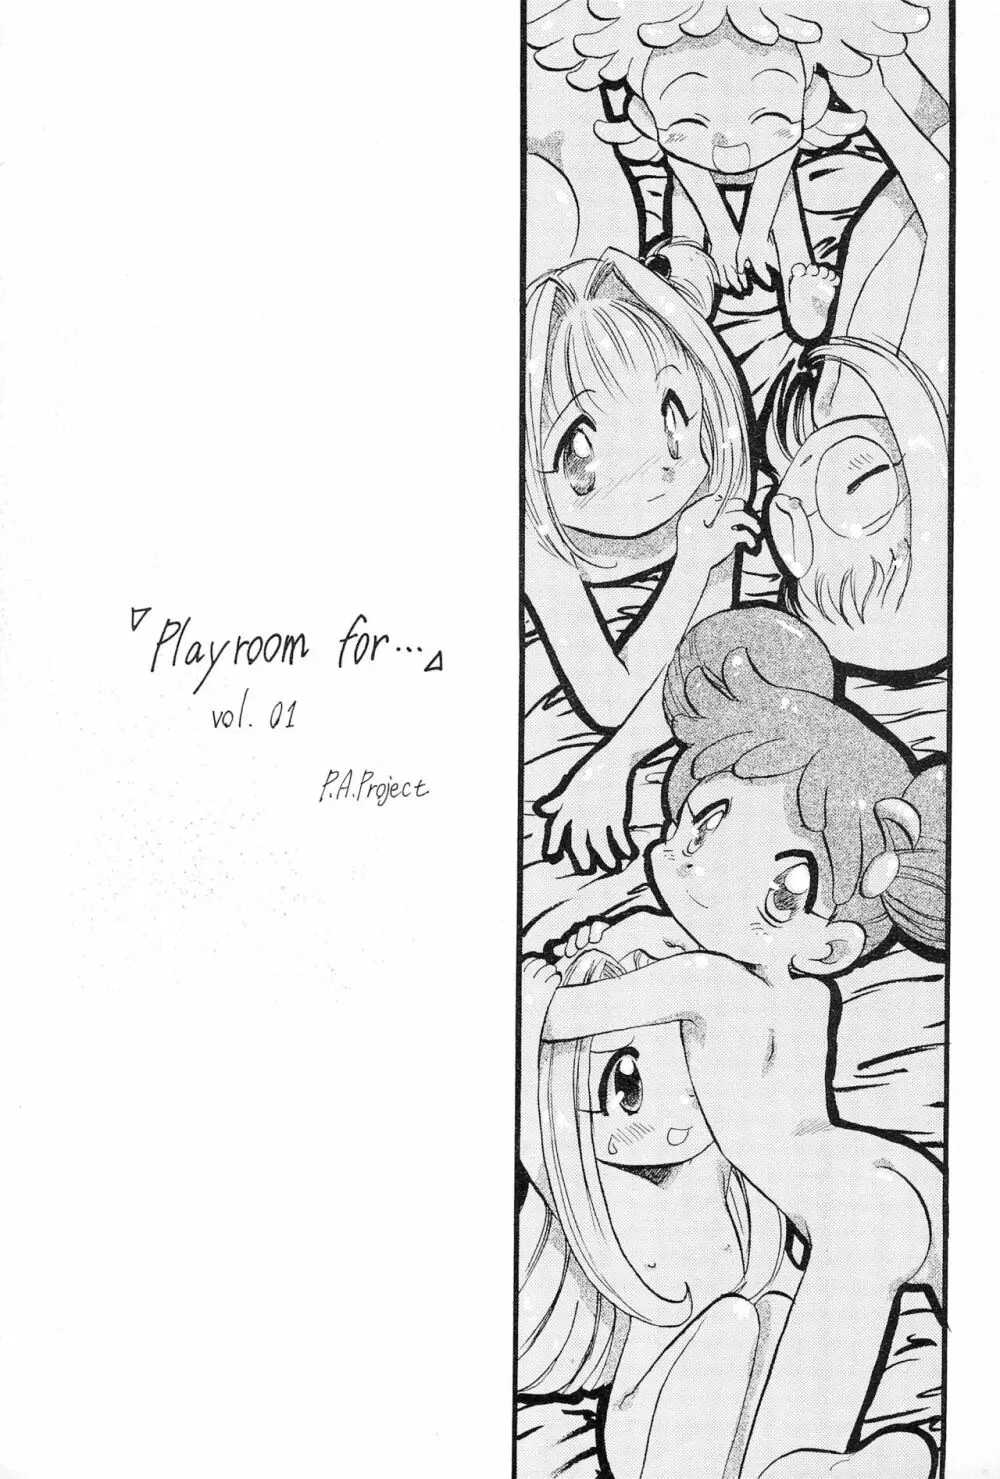 「Playroom for...」 vol.1 - page1